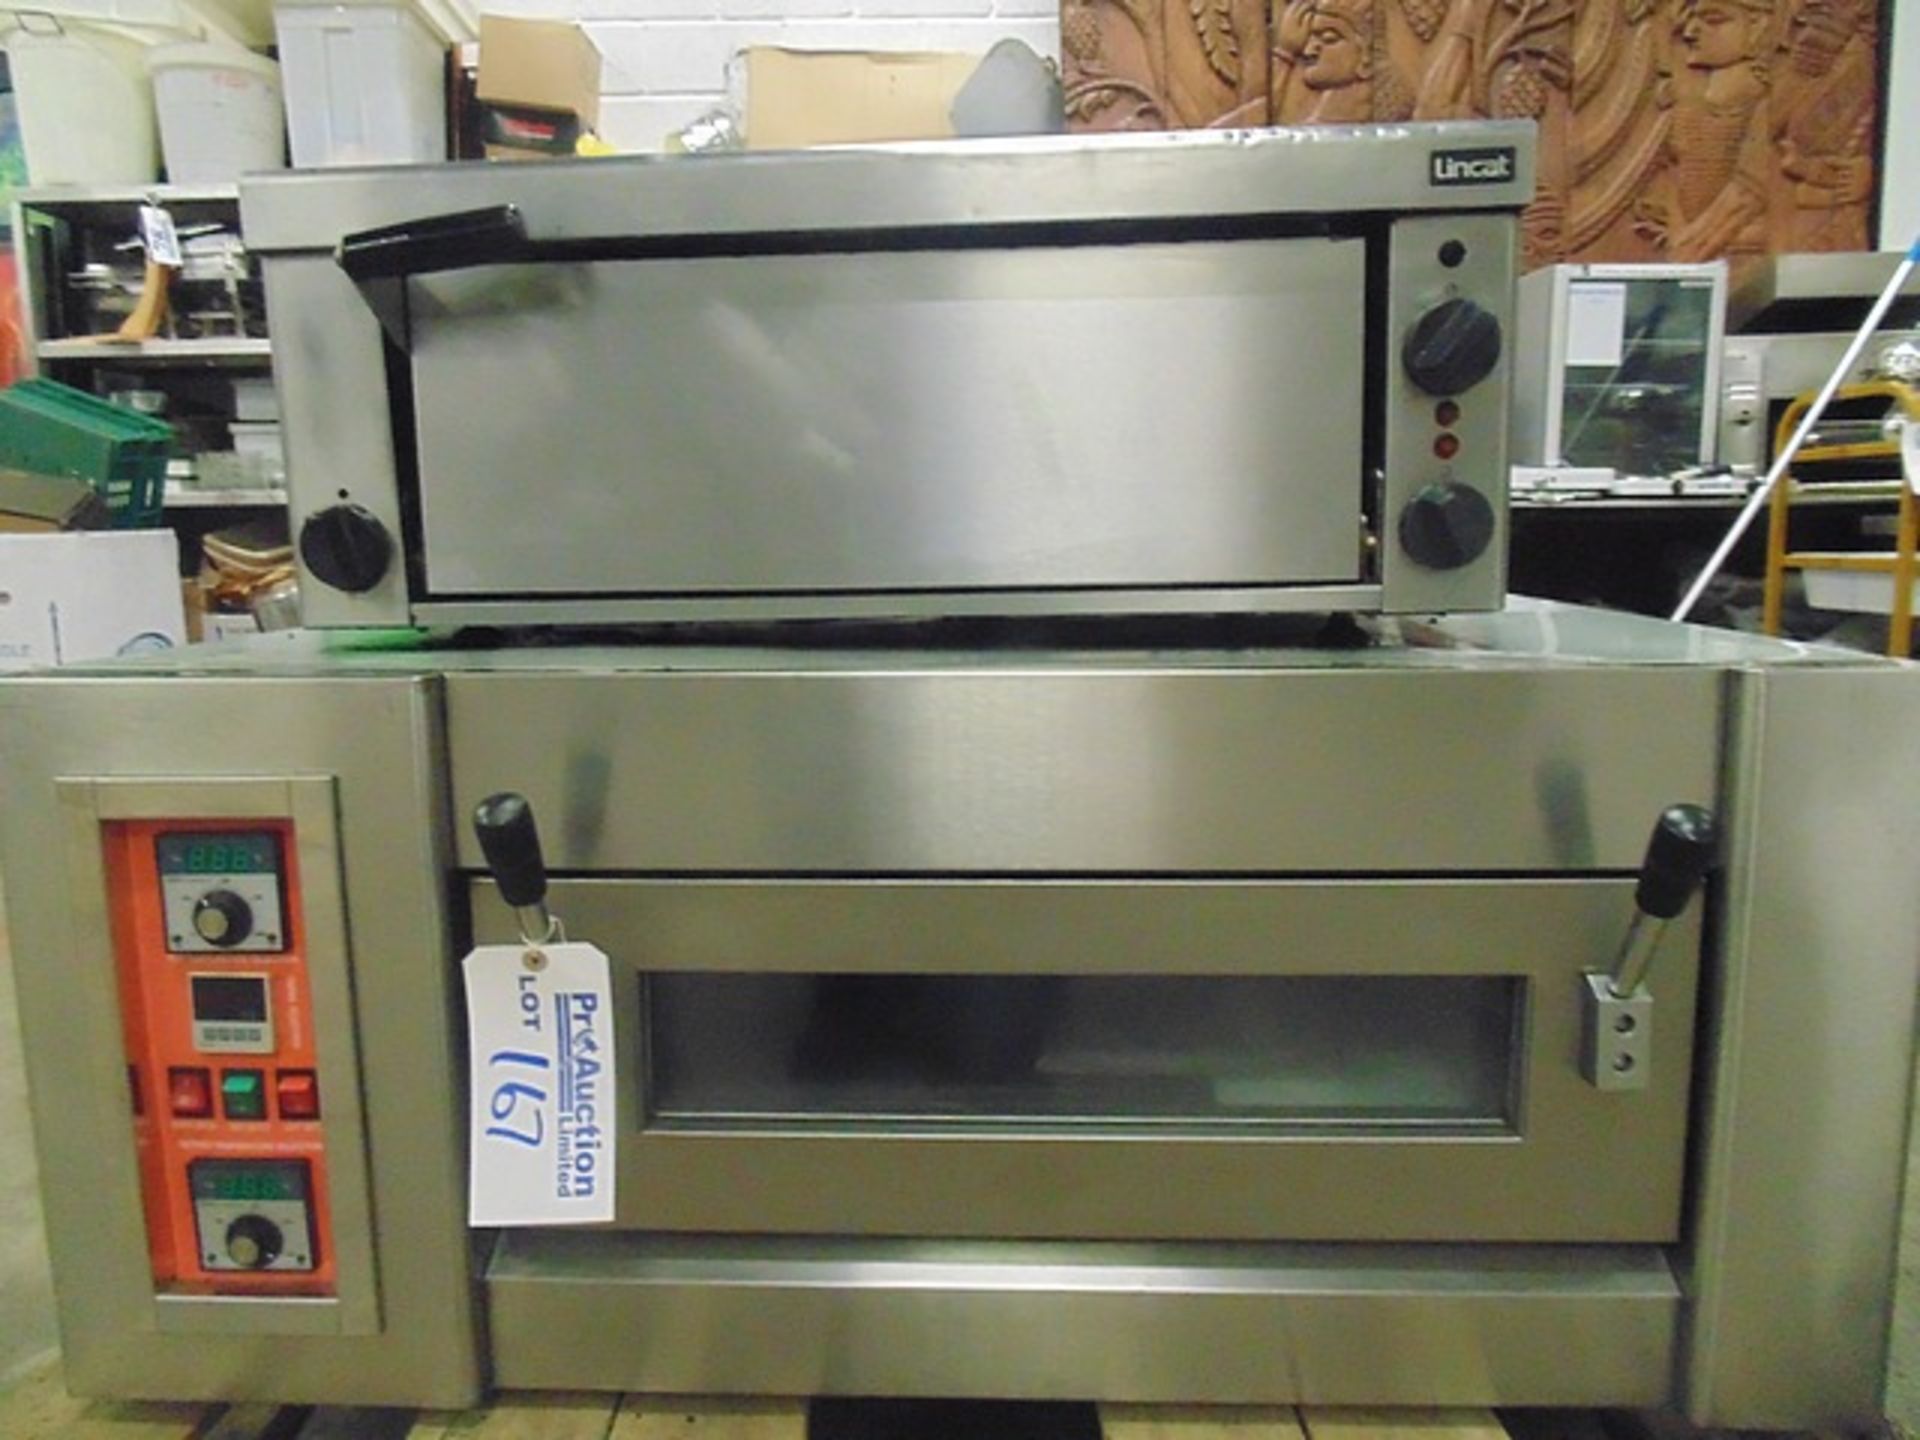 Commercial single deck pizza oven 6.5kW stainless steel deck pizza oven chamber opening 660mm x